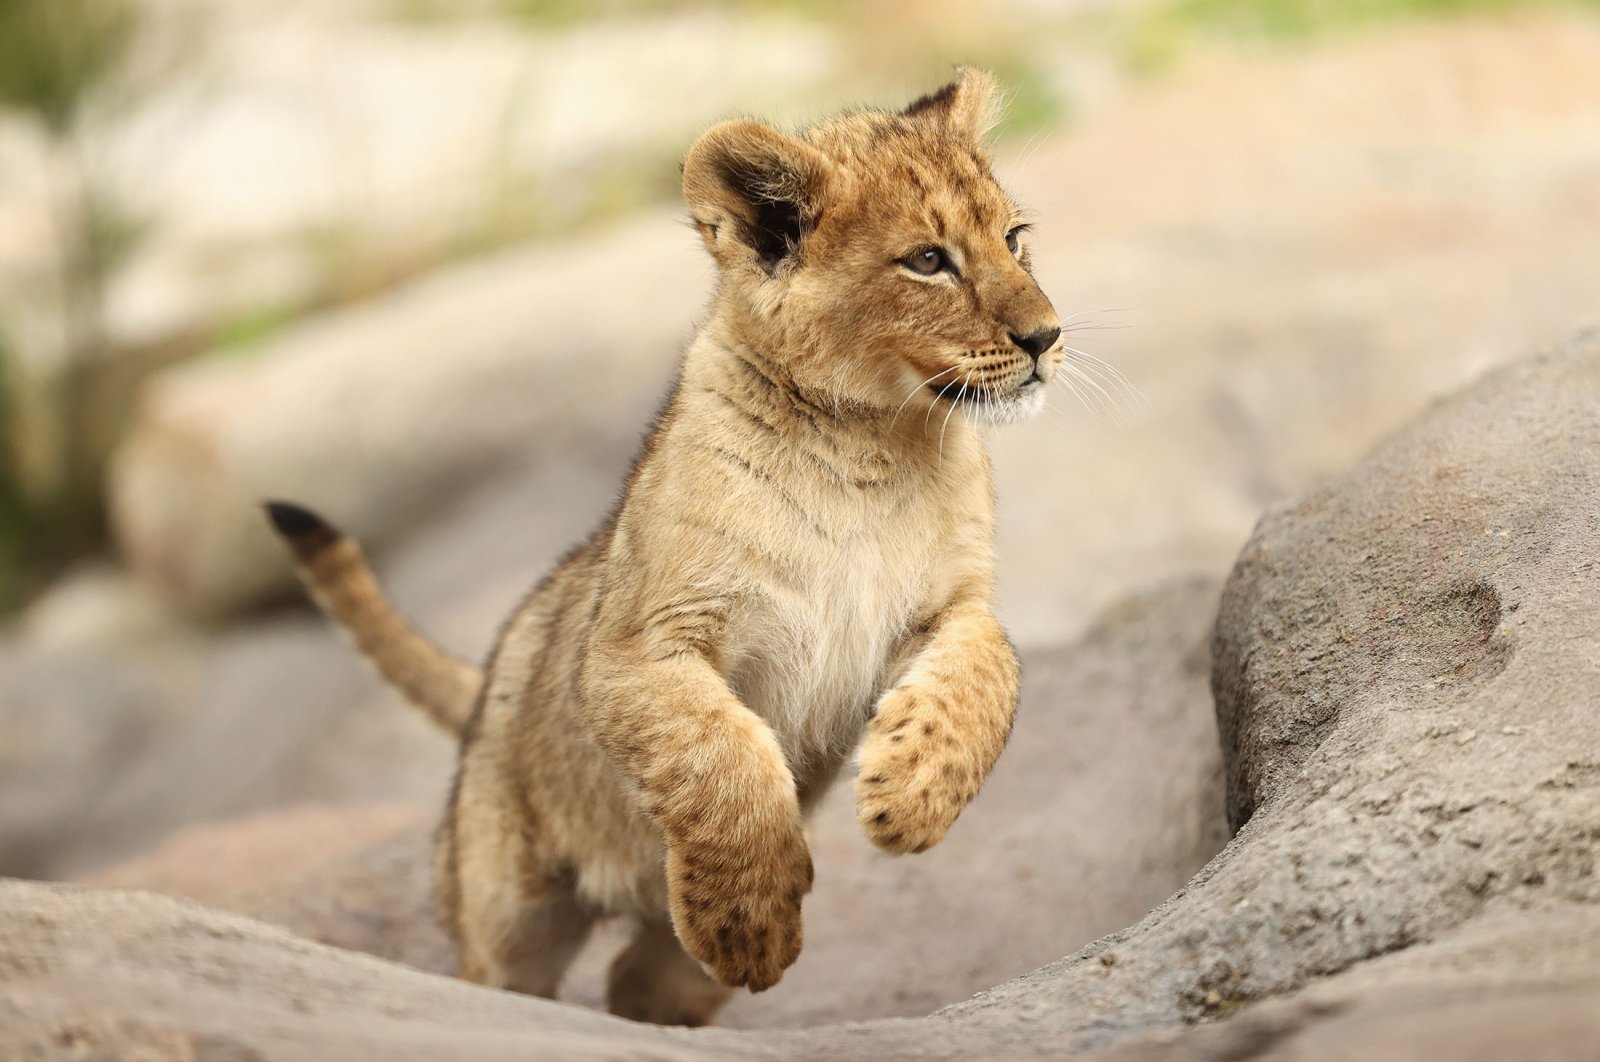 Cute Lion Cubs Wallpapers